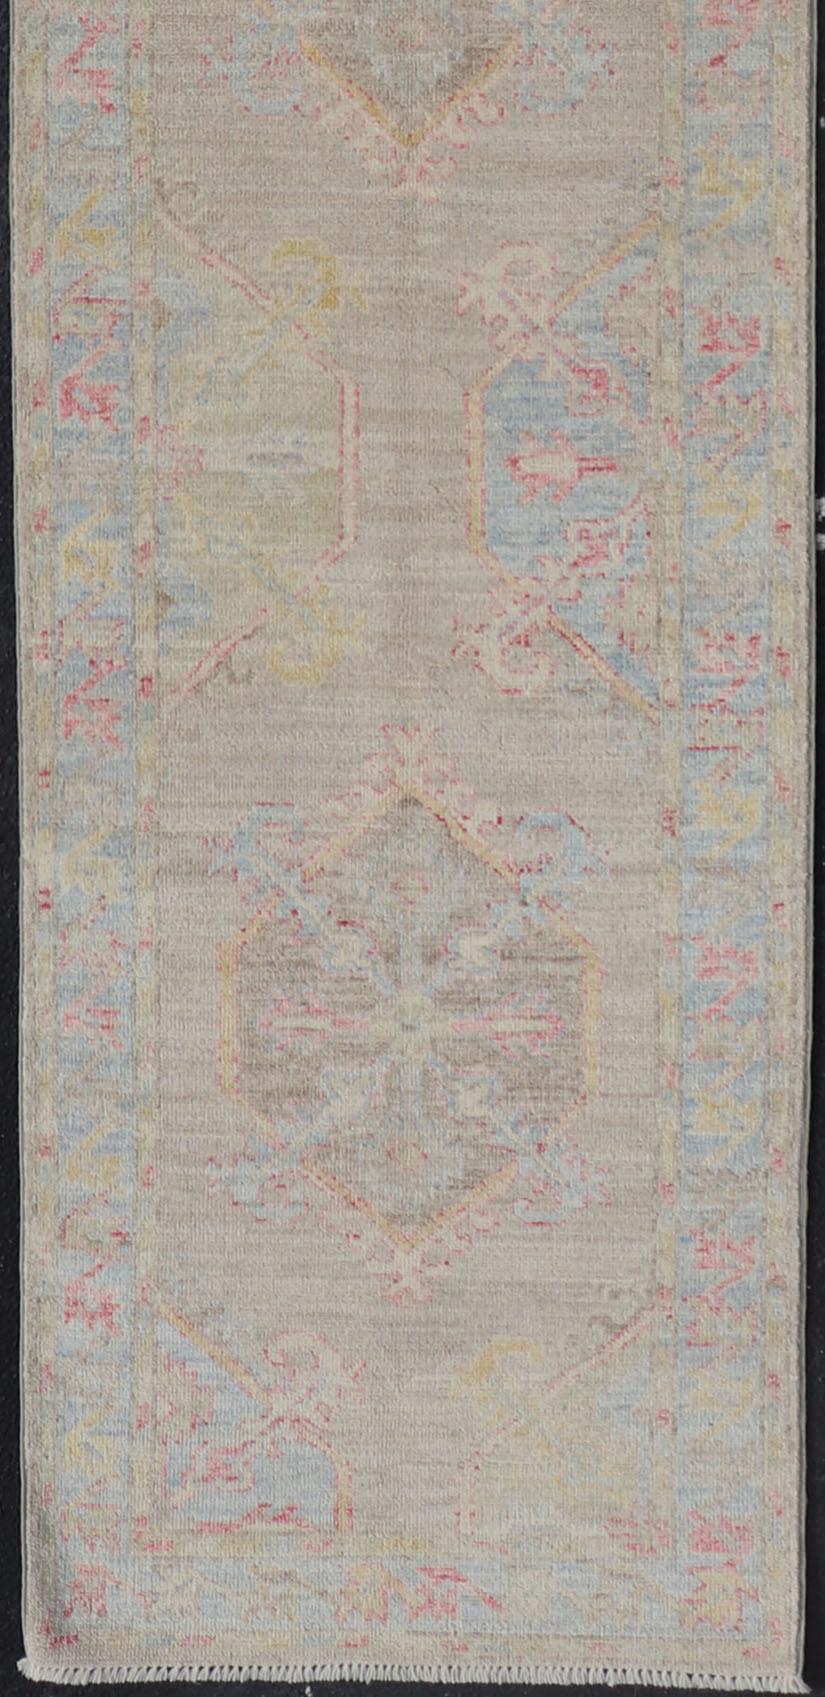 Hand-Knotted Oushak runner with Medallion Design on a Tan Field With Red & Blue. Keivan Woven Arts; rug AWR-AR118 Country of Origin: Afghanistan Type: Oushak Design: Medallion, Motif, Floral Motif

This modern piece holds large medallions in the